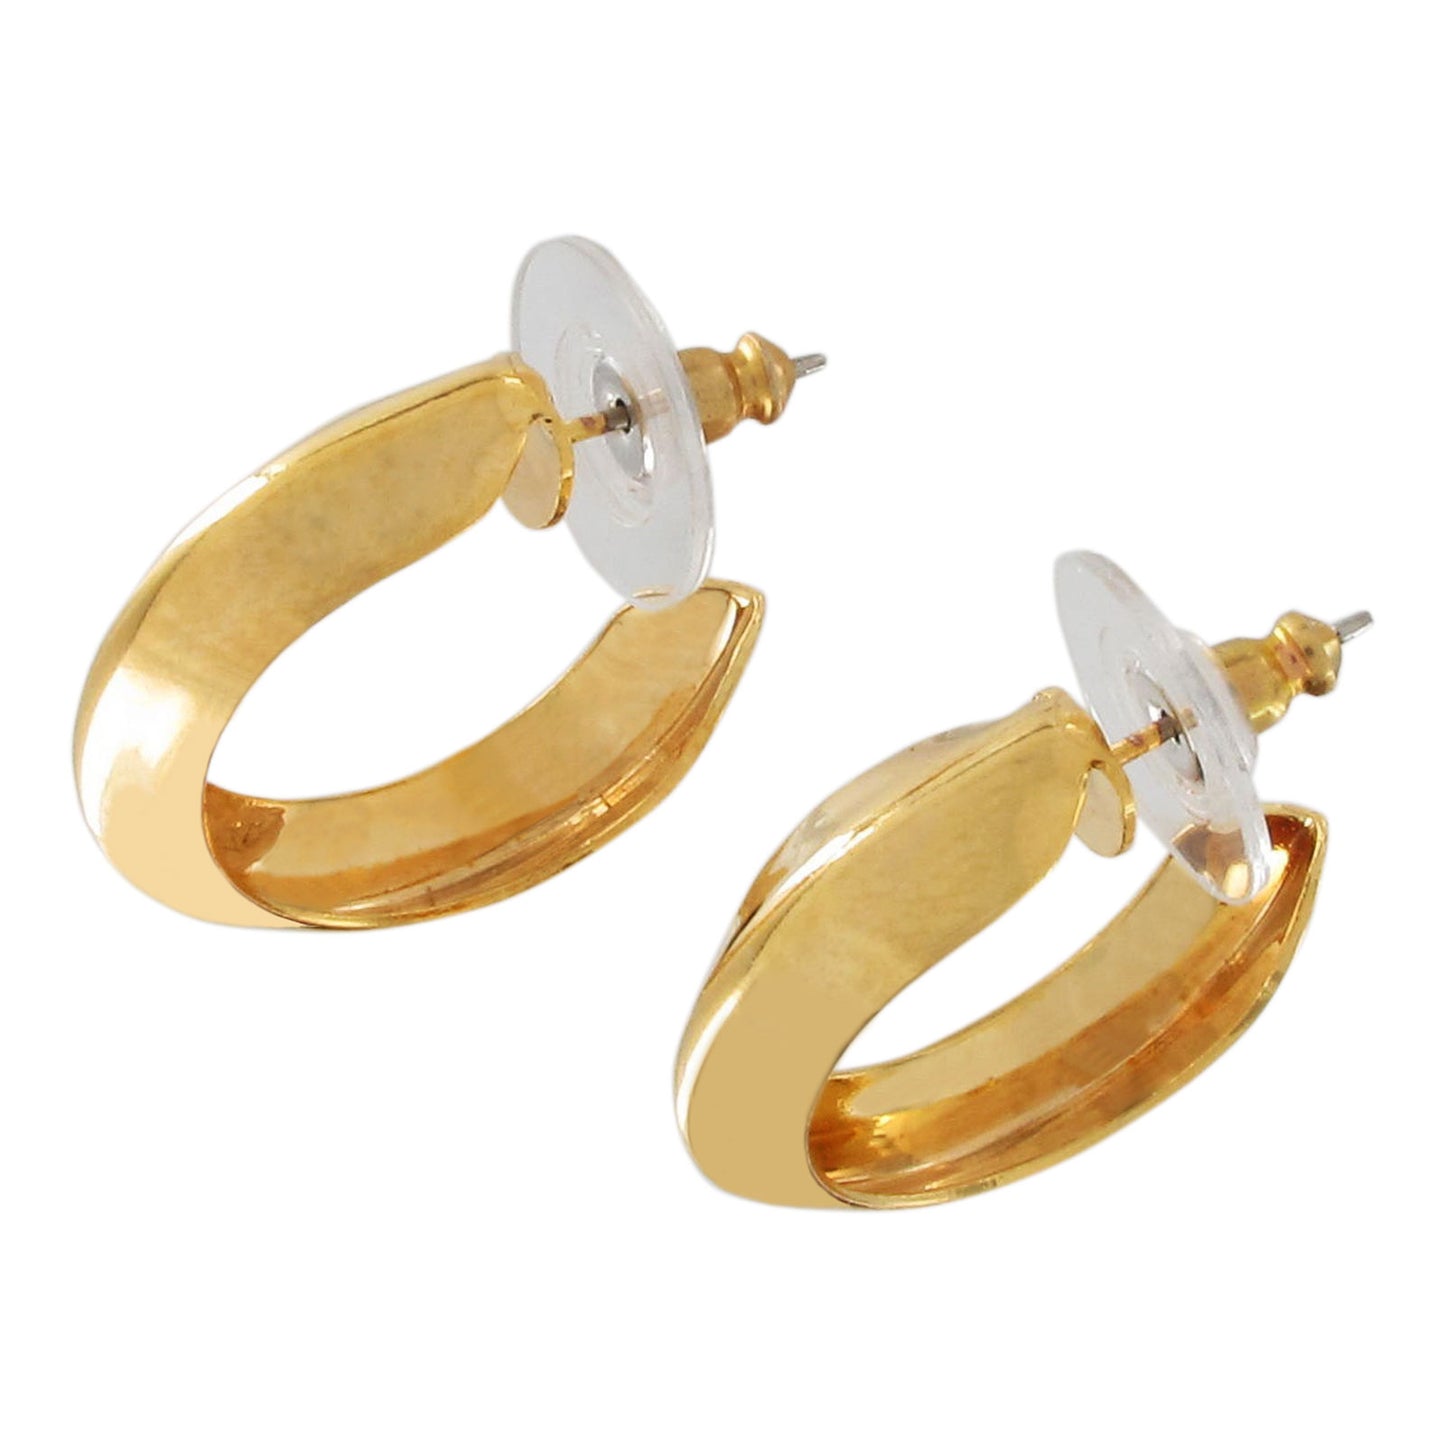 Gold Tone Hollow Hoop Light Weight Pointed Concave Earrings 1"